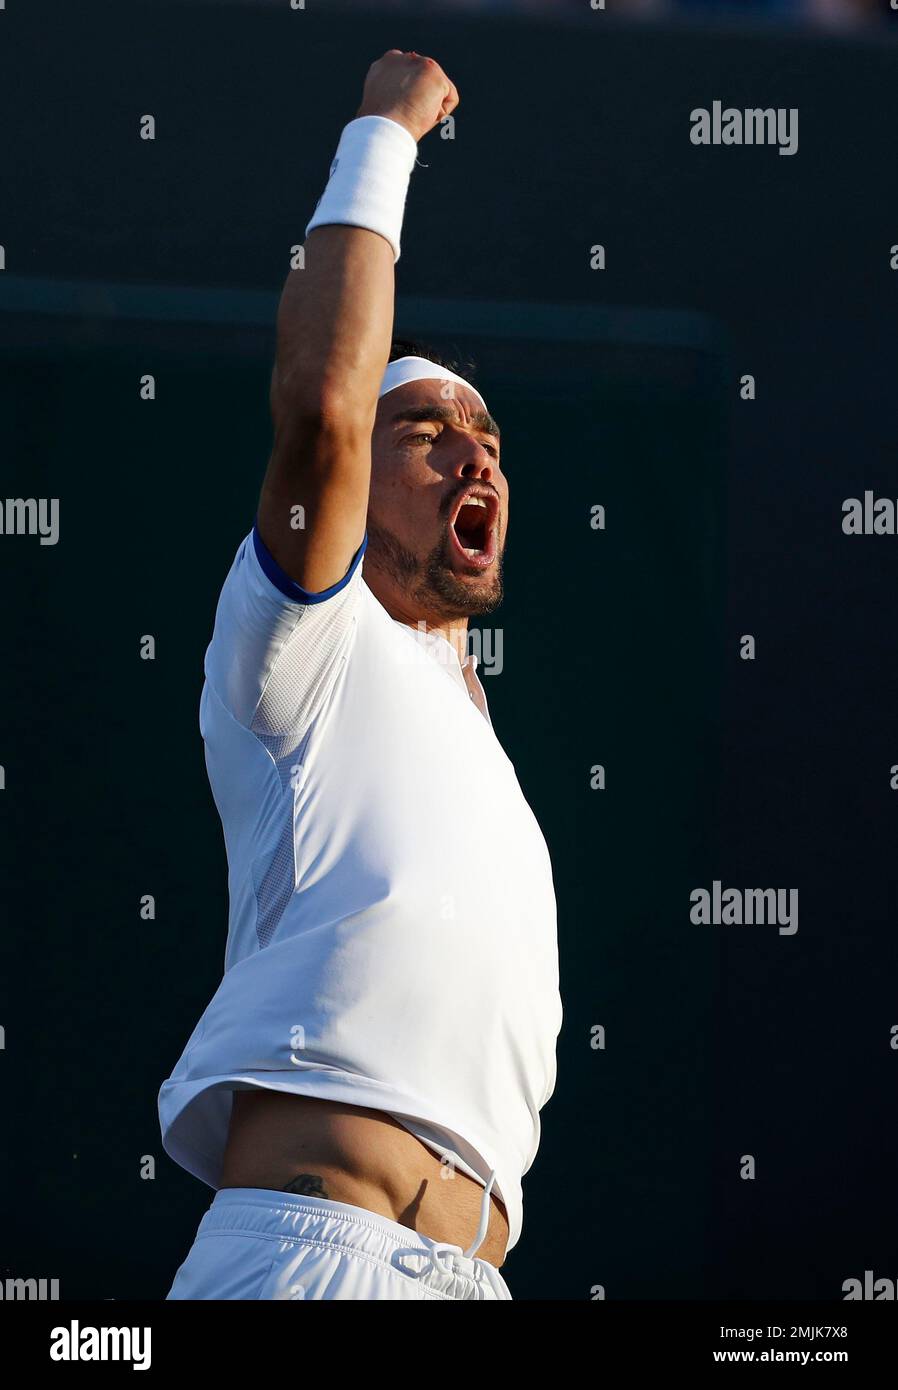 Italys Fabio Fognini celebrates after beating Hungarys Marton Fucsovics in a Mens singles match during day four of the Wimbledon Tennis Championships in London, Thursday, July 4, 2019